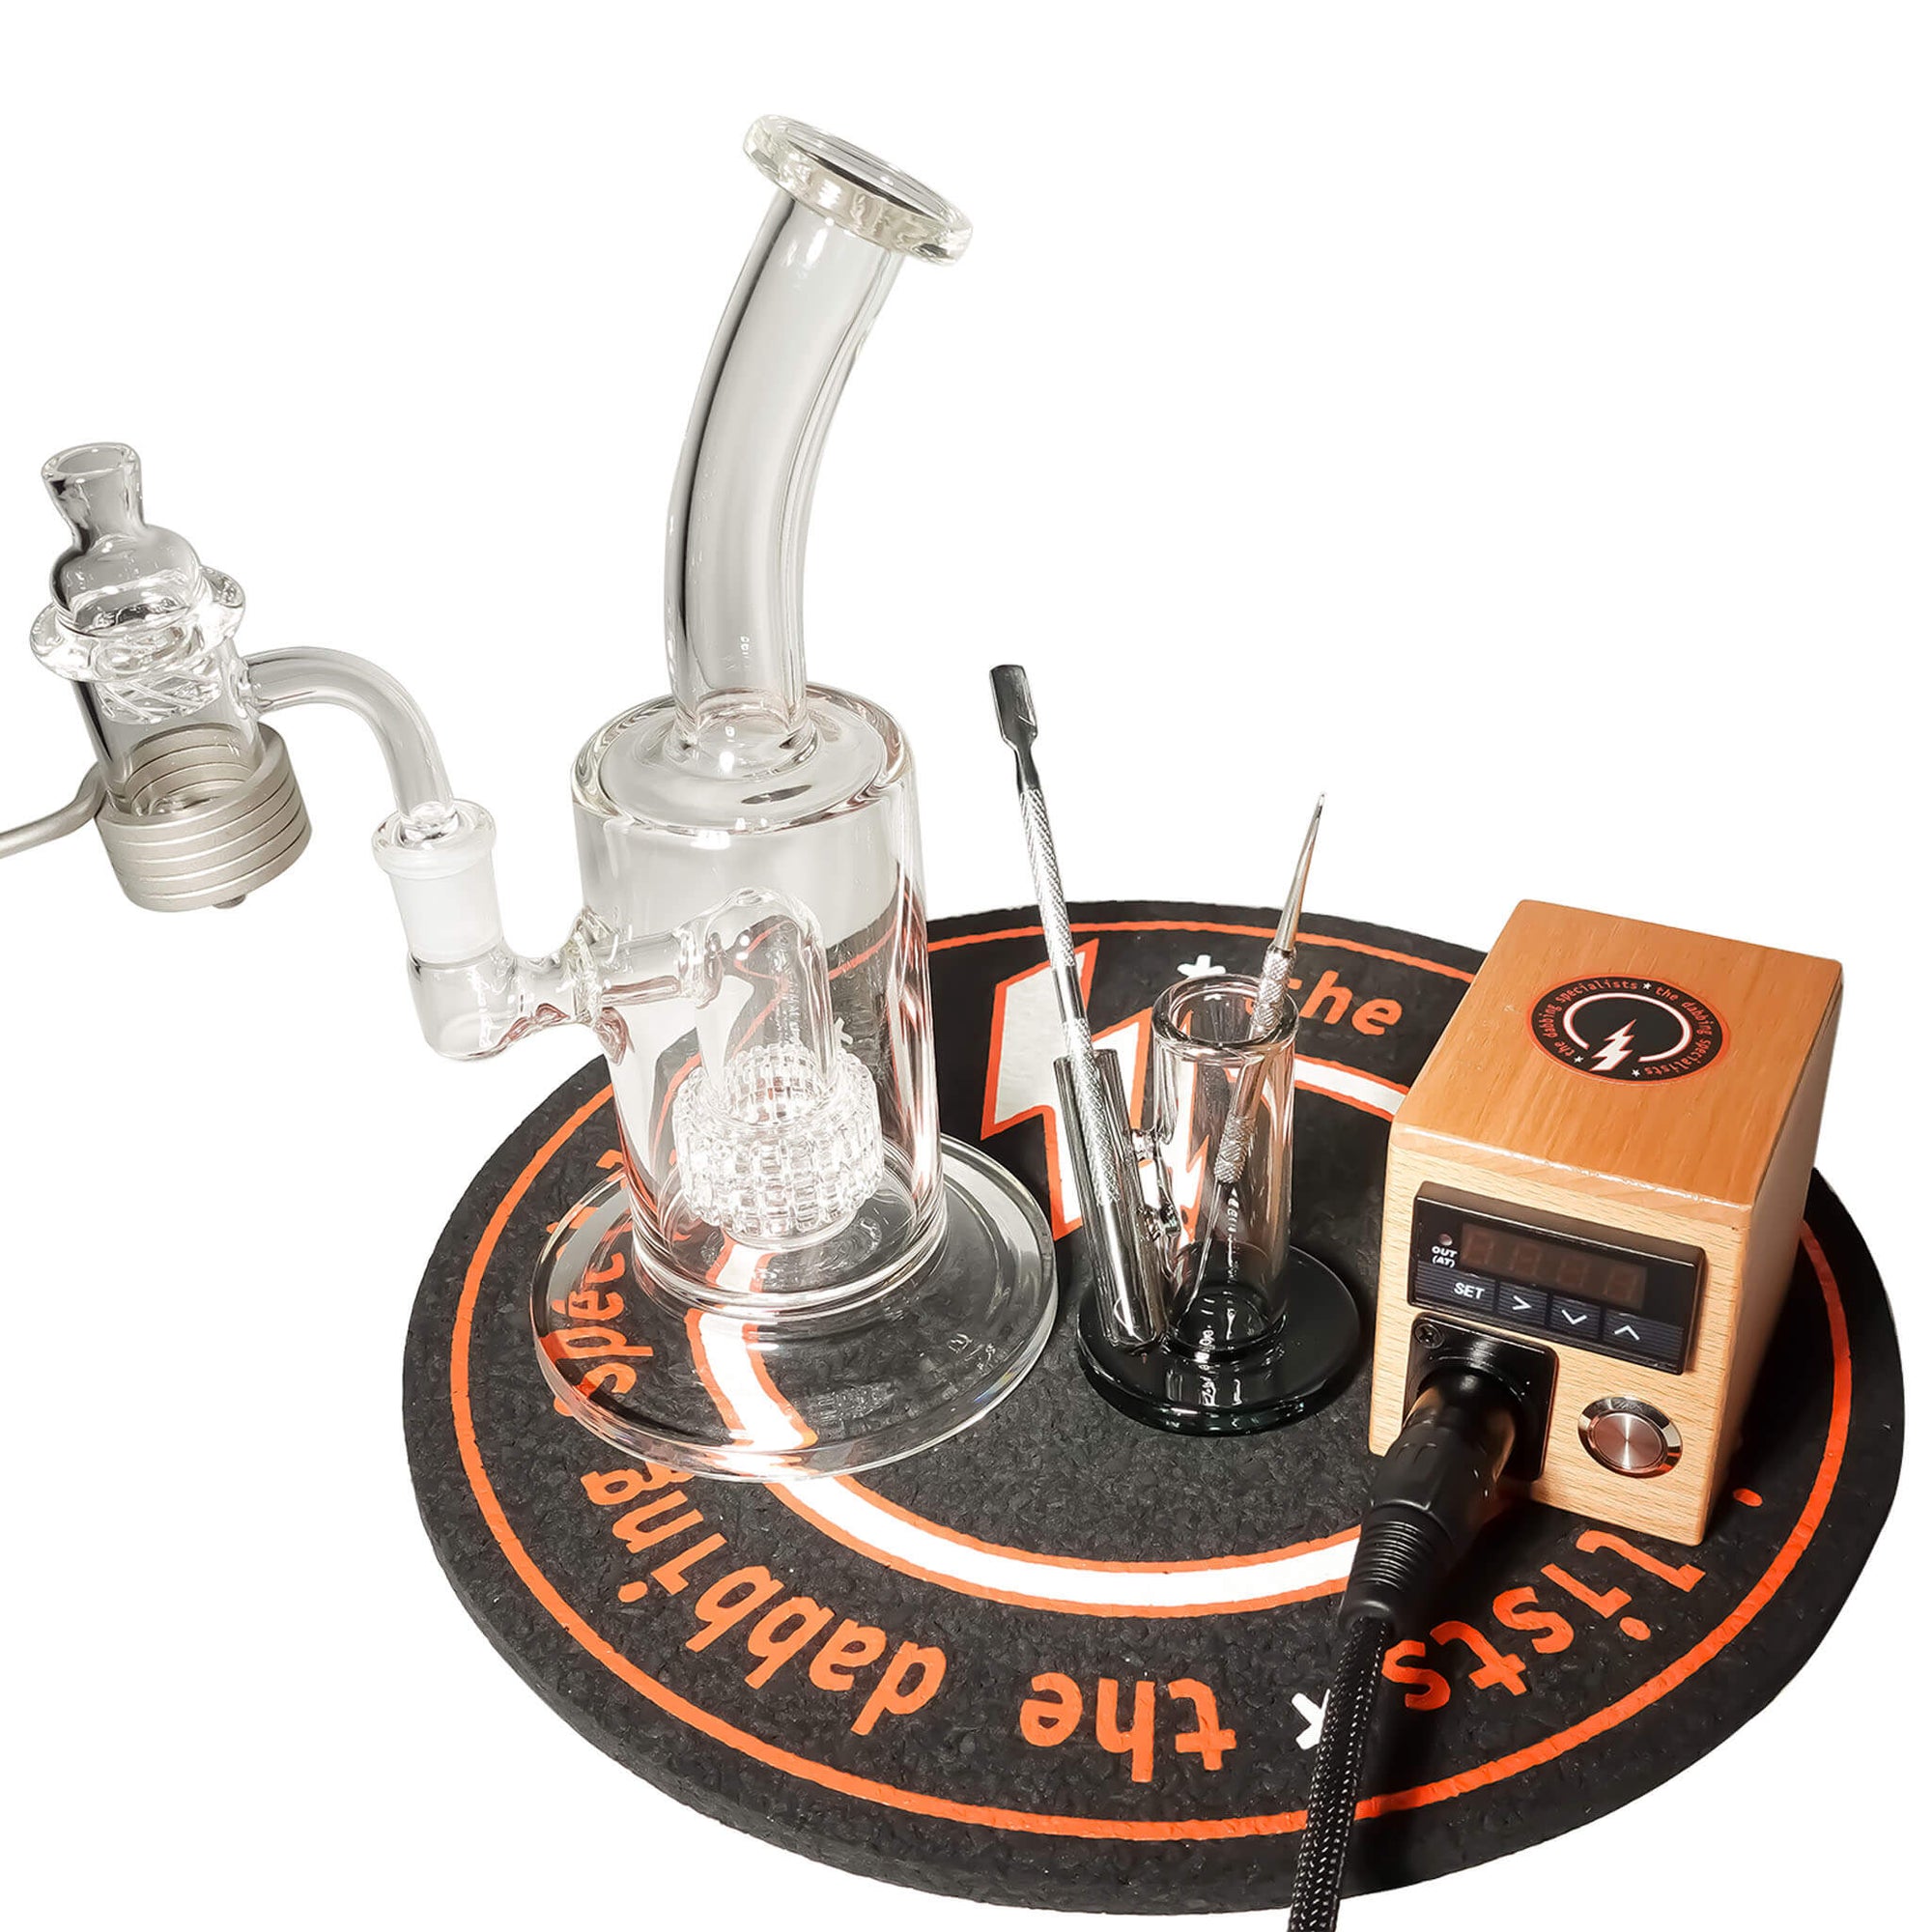 Commander 25mm E-Banger Deluxe Enail Kit | Wood Grain Kit View | the dabbing specialists